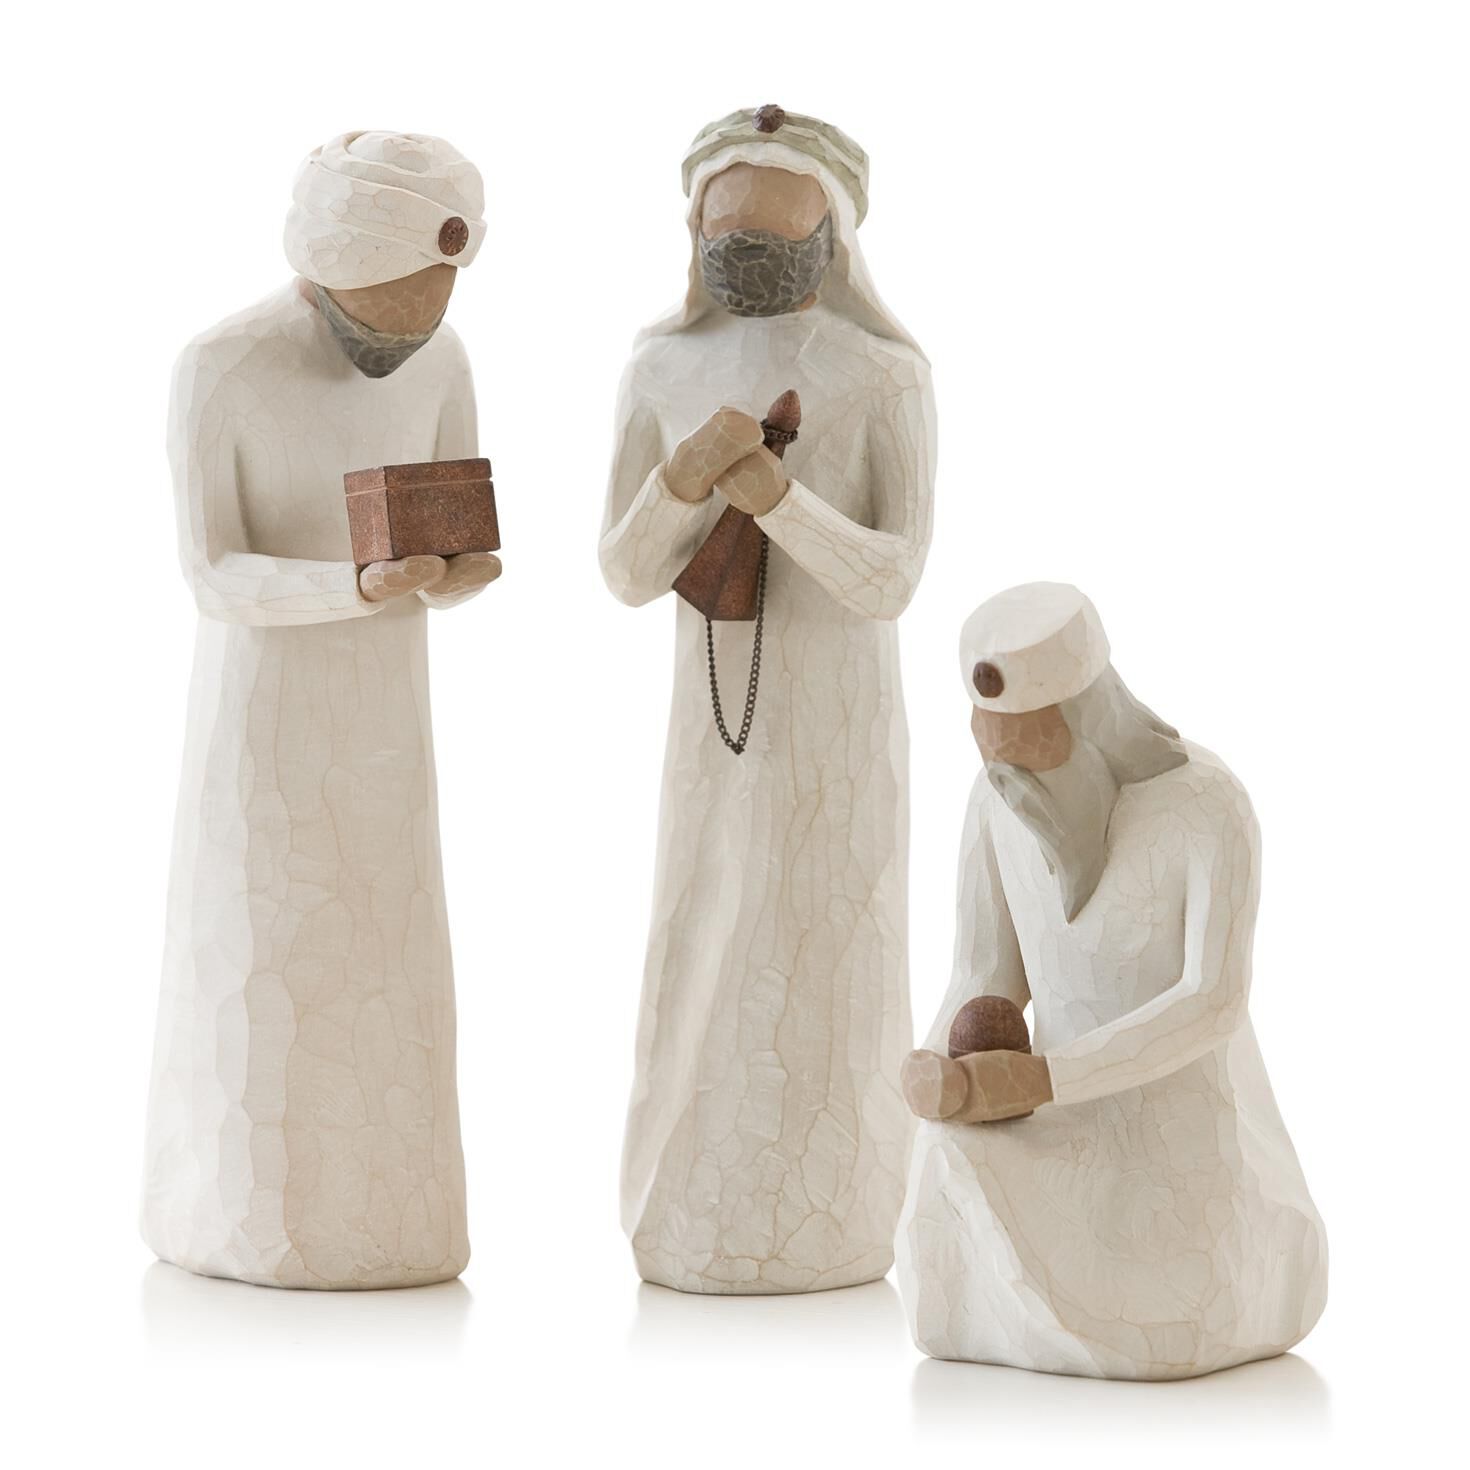 Alessi Hand Decorated Three Wise Men Nativity Figurines Set of 3 Porcelain